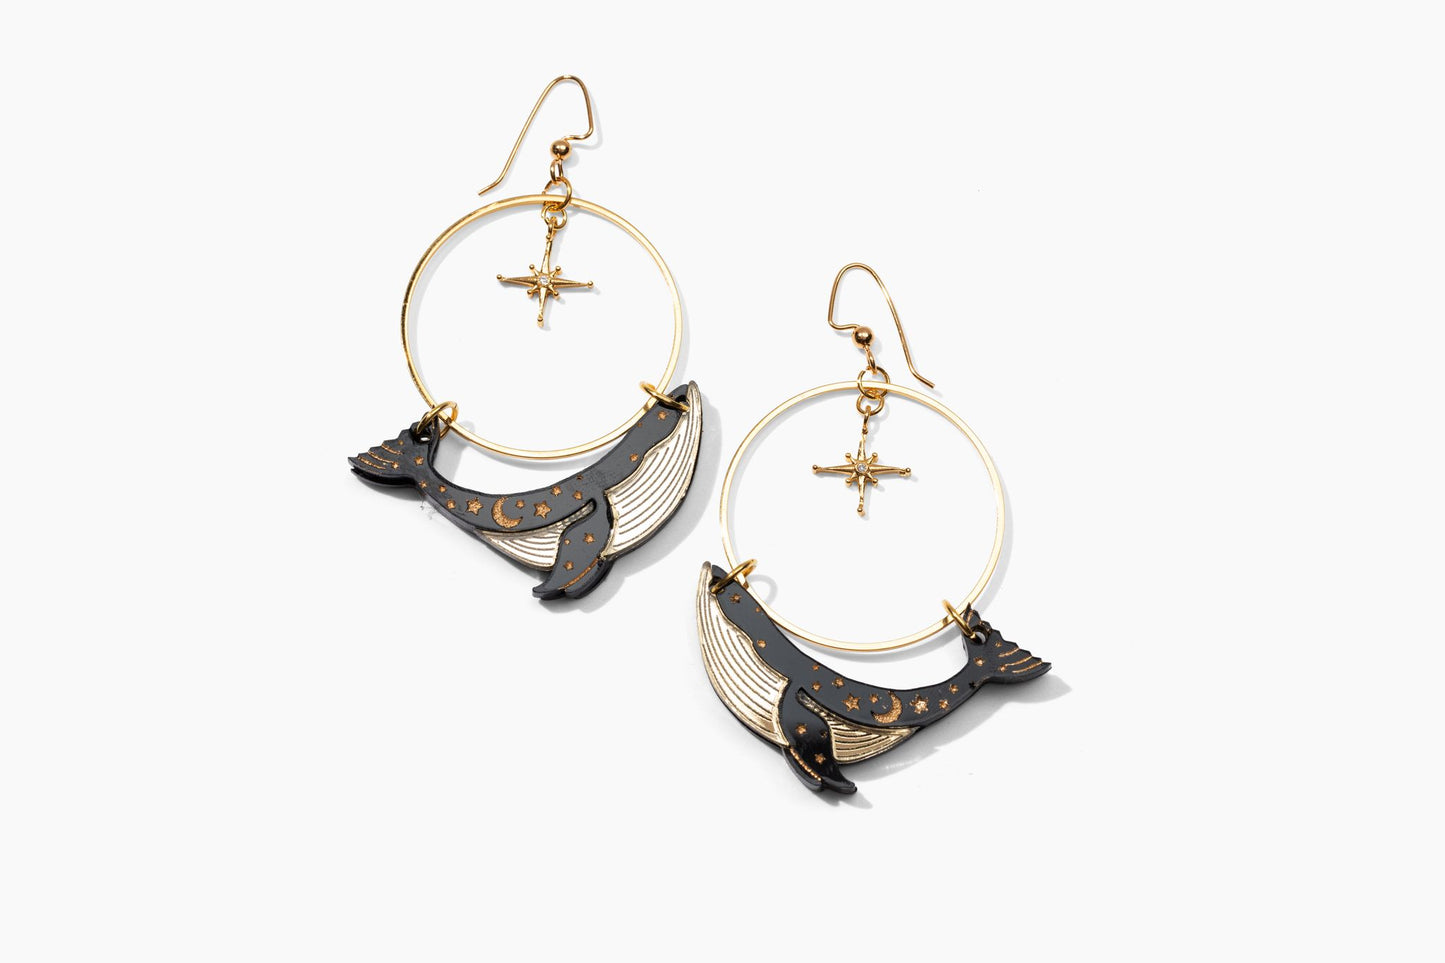 North Star Guide Whale Earrings